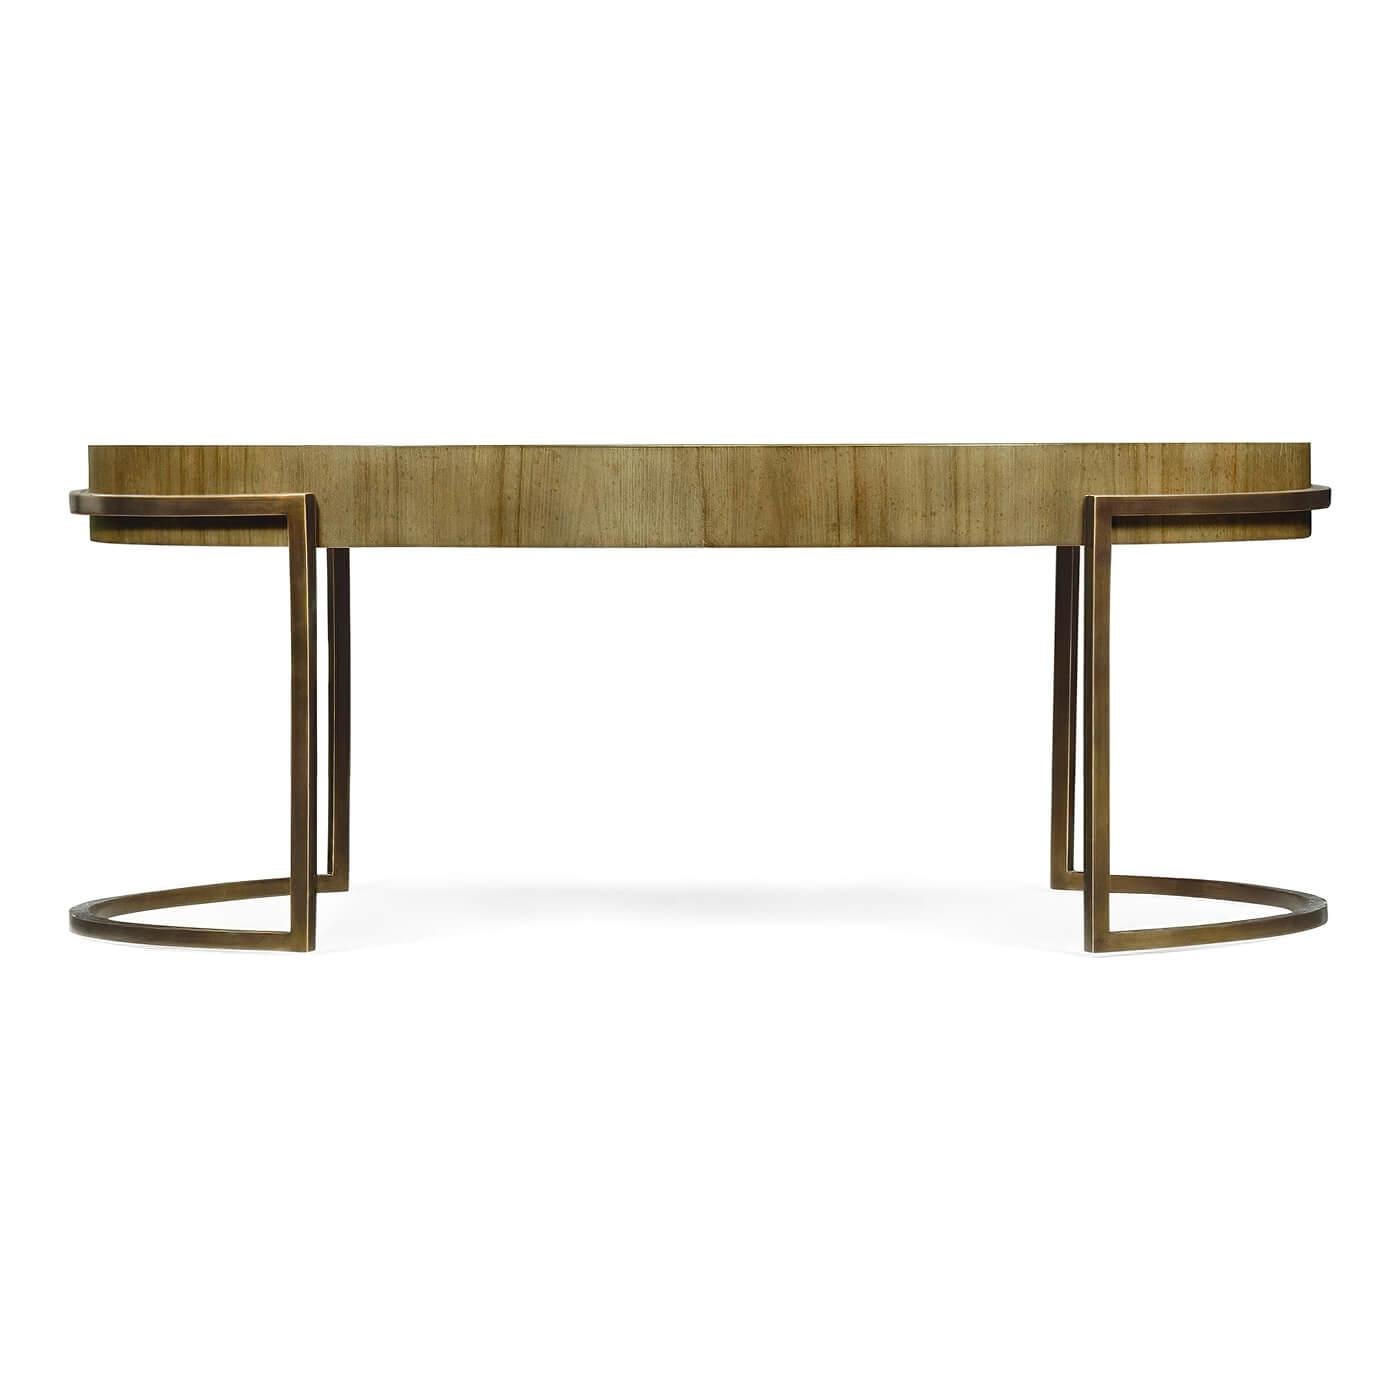 Modern oval chestnut coffee table with a light bronzed finish iron trestle support base. 

Dimensions: 50